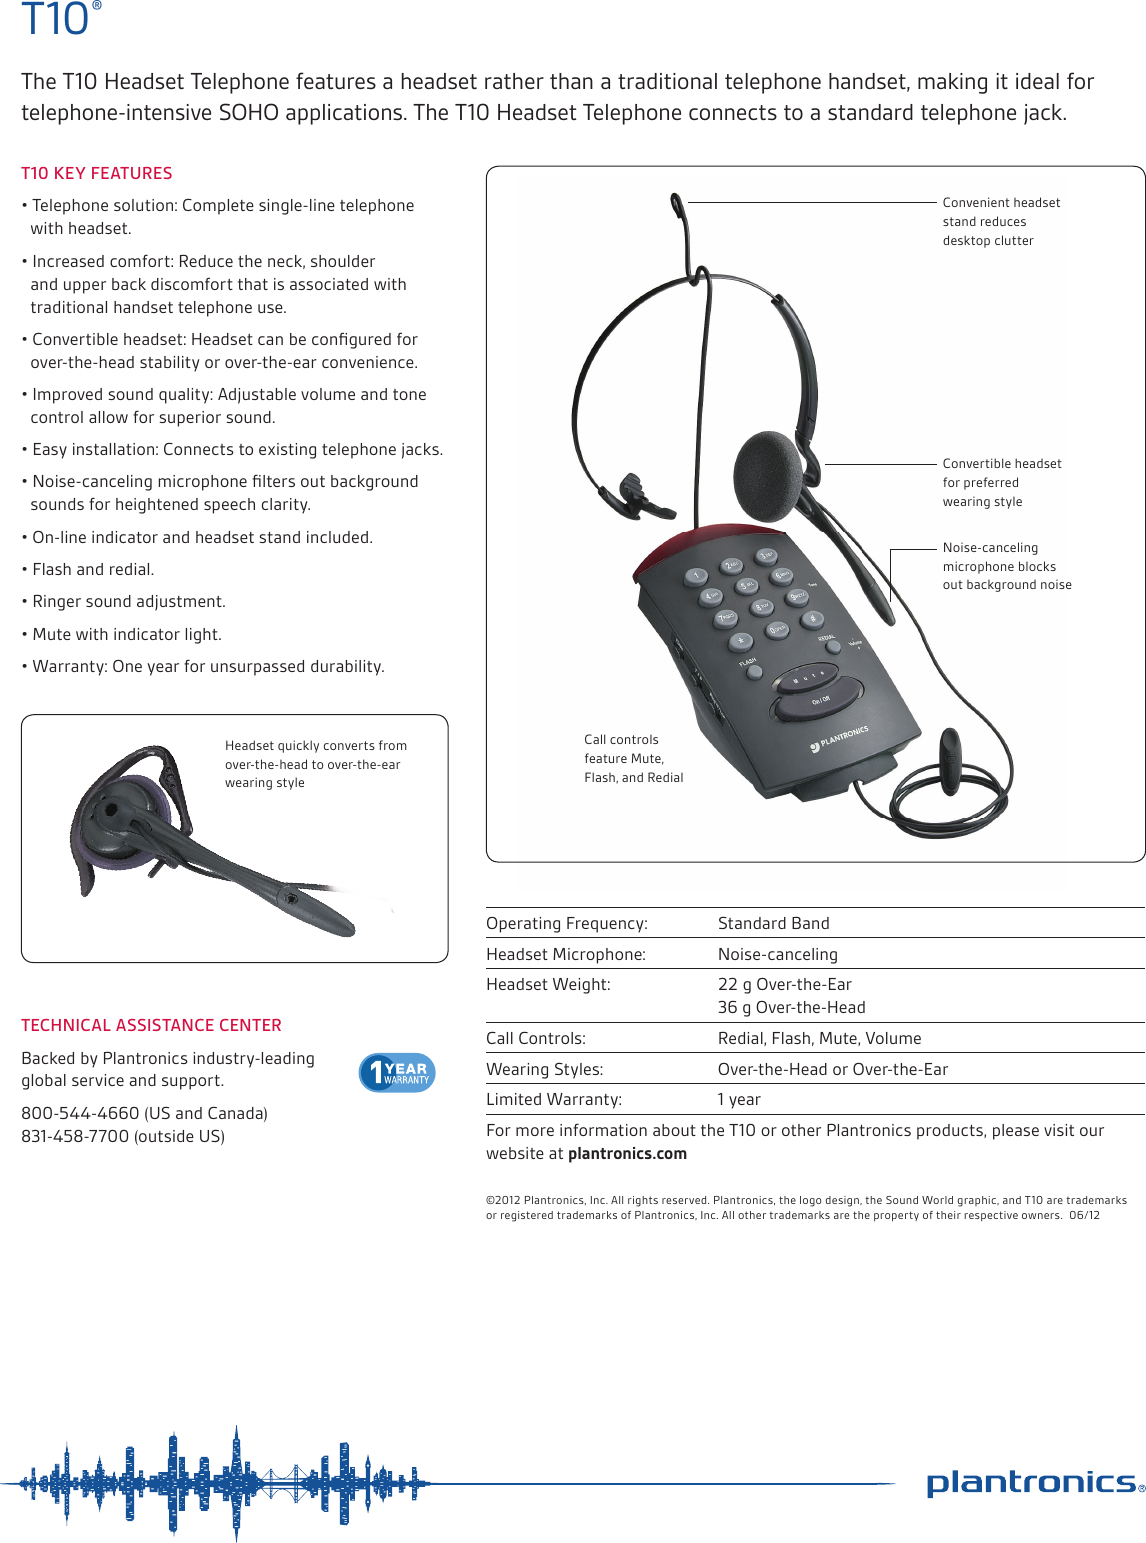 Page 2 of 2 - Plantronics 1151_T10_PS_060112 T10-ps